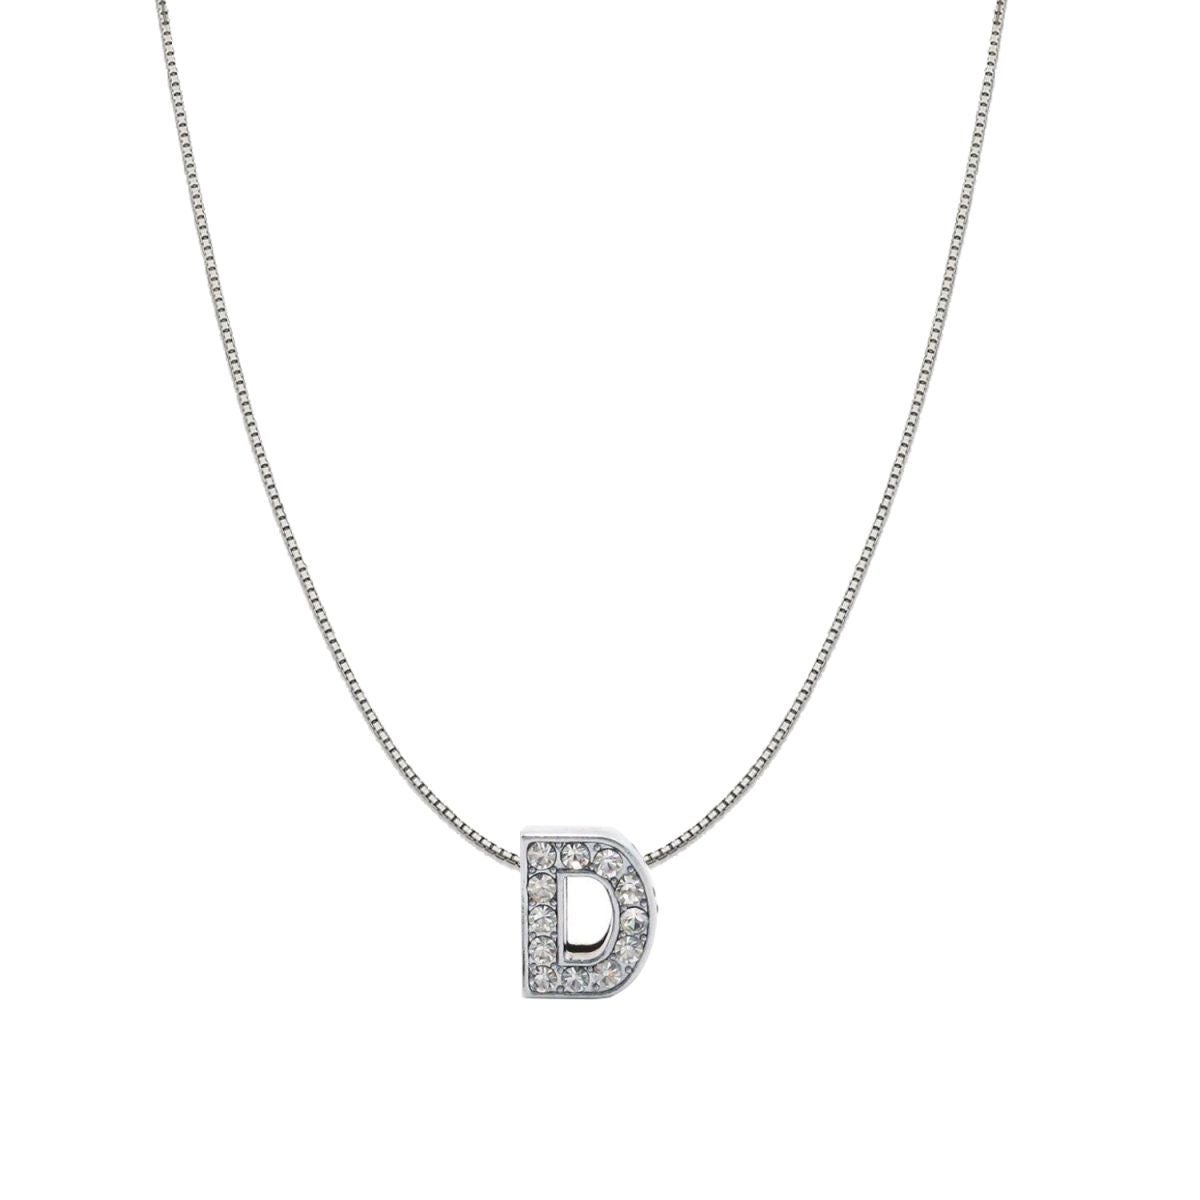 Tiny Initial Letter D Necklace - 925 Sterling Silver - Name D Letter Charm  NEW | eBay